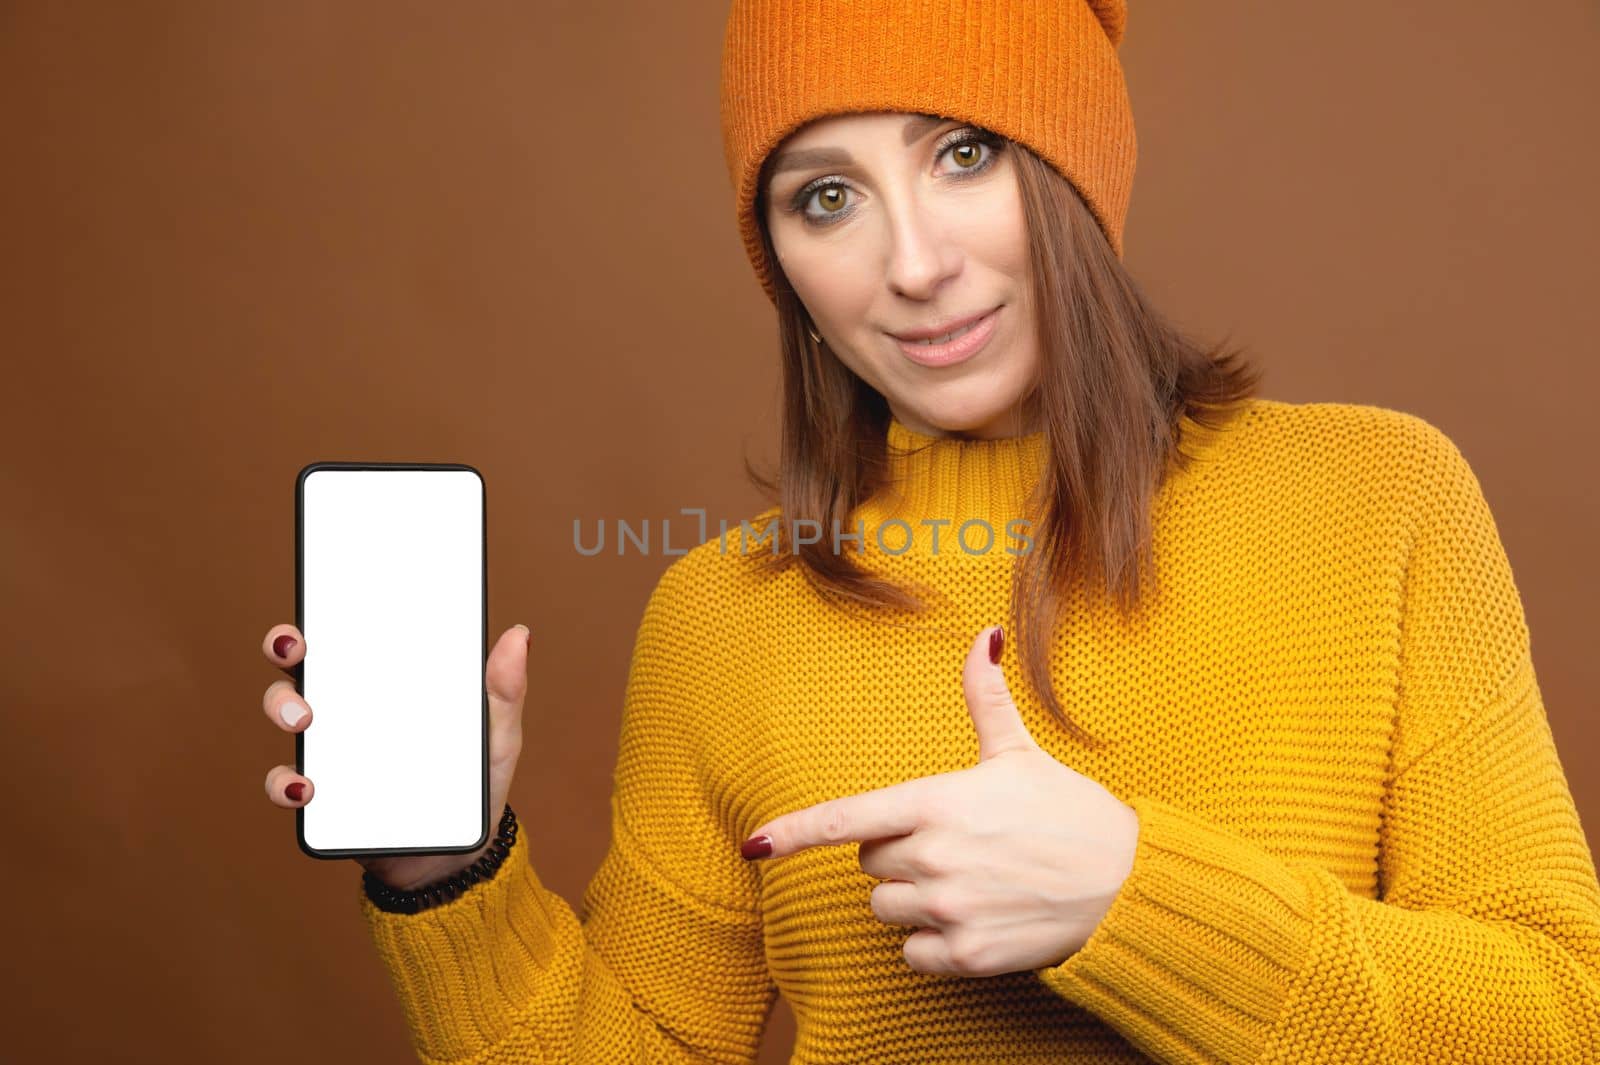 Middle-aged caucasian woman in a hat and sfiter holds a phone with a cut-out screen. points at it with a finger while looking at the camera.